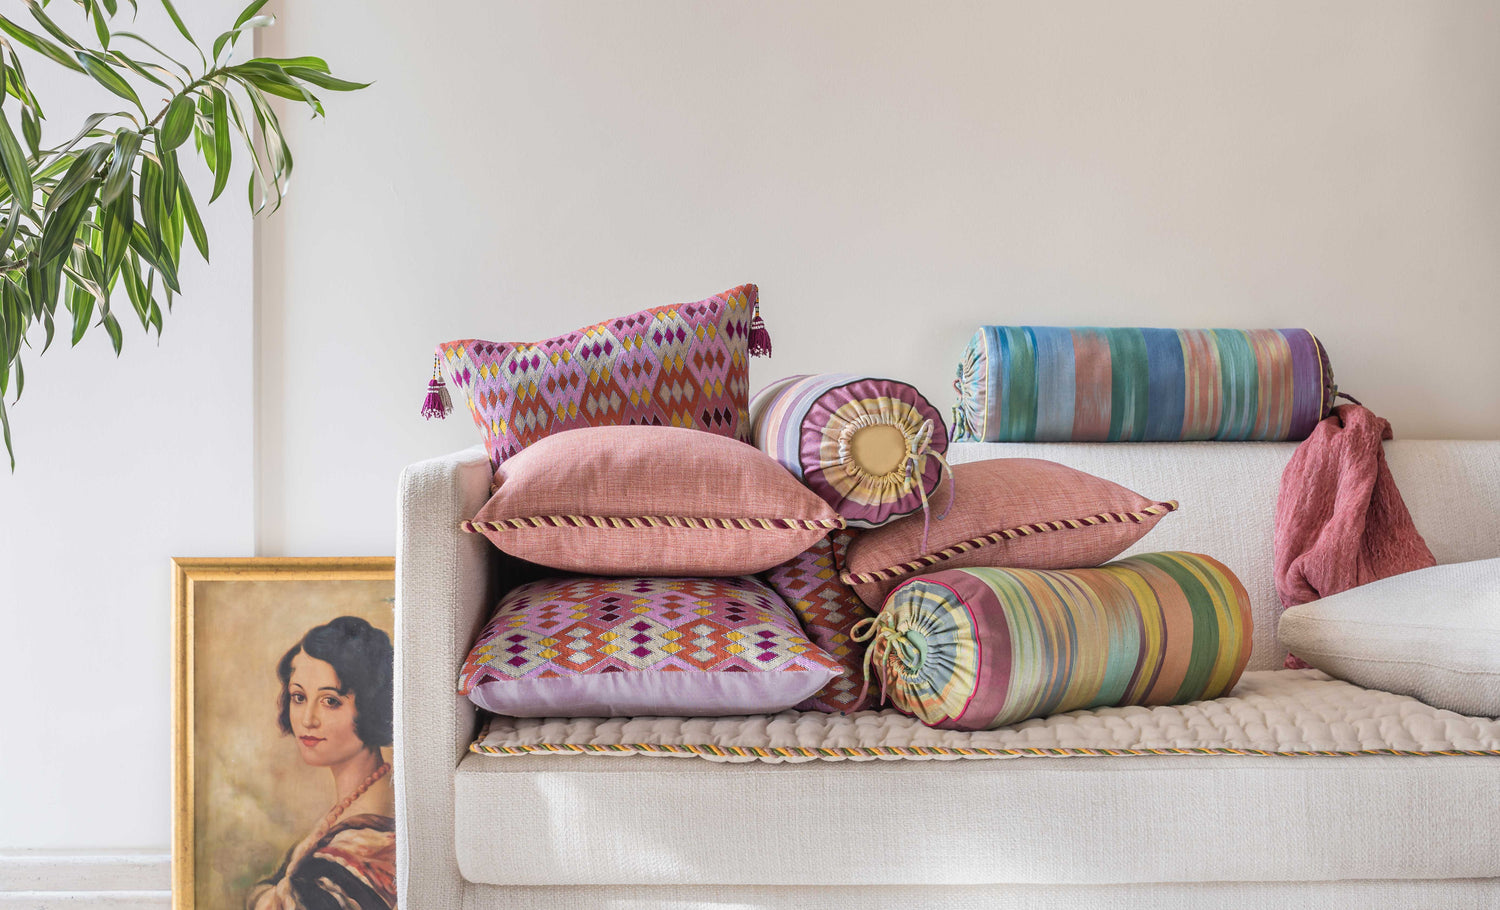 Styled Laneh colorful Cushions with sofa pad